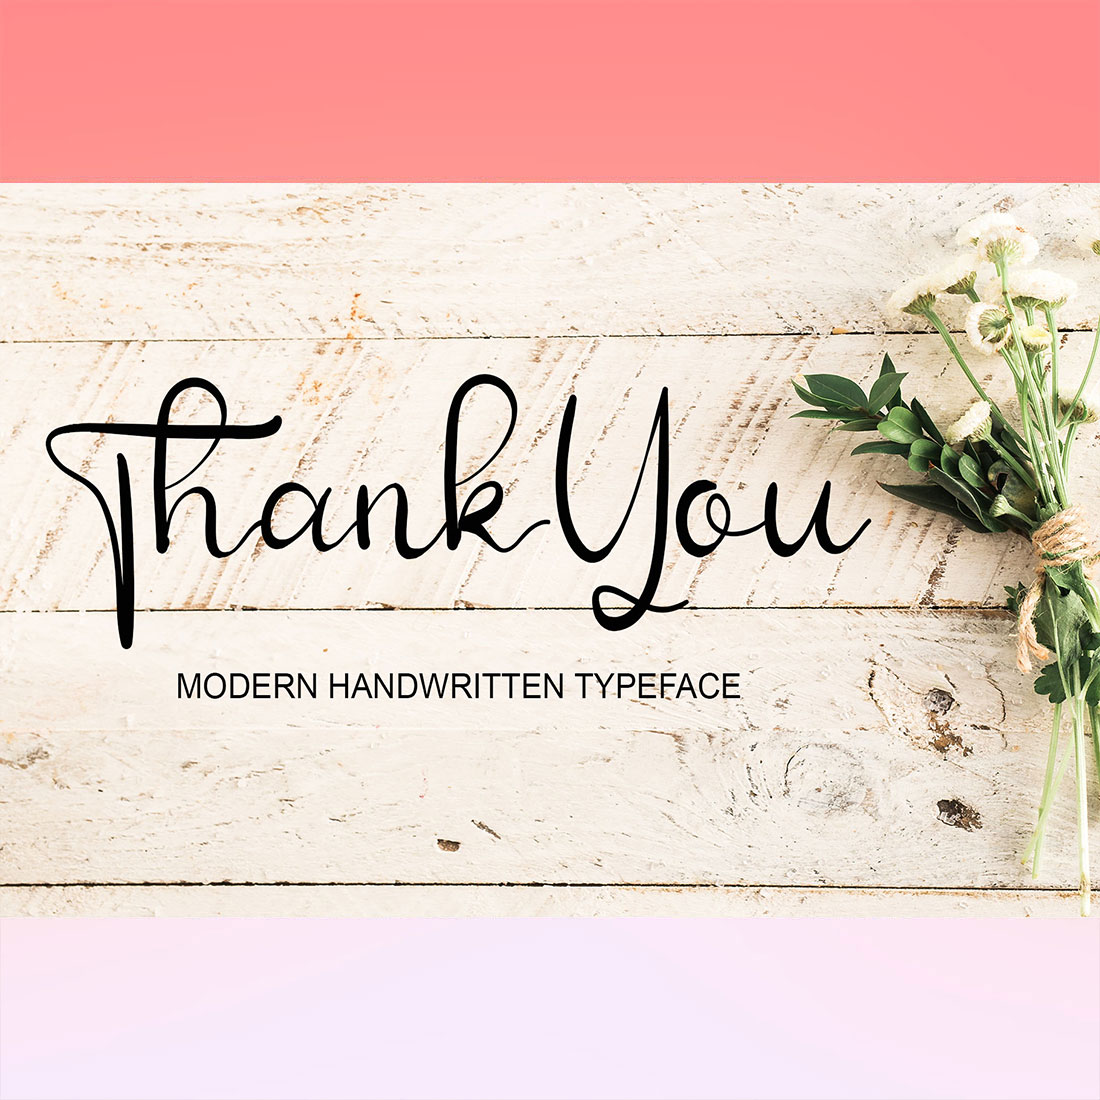 Wooden sign that says thank you with flowers on it.